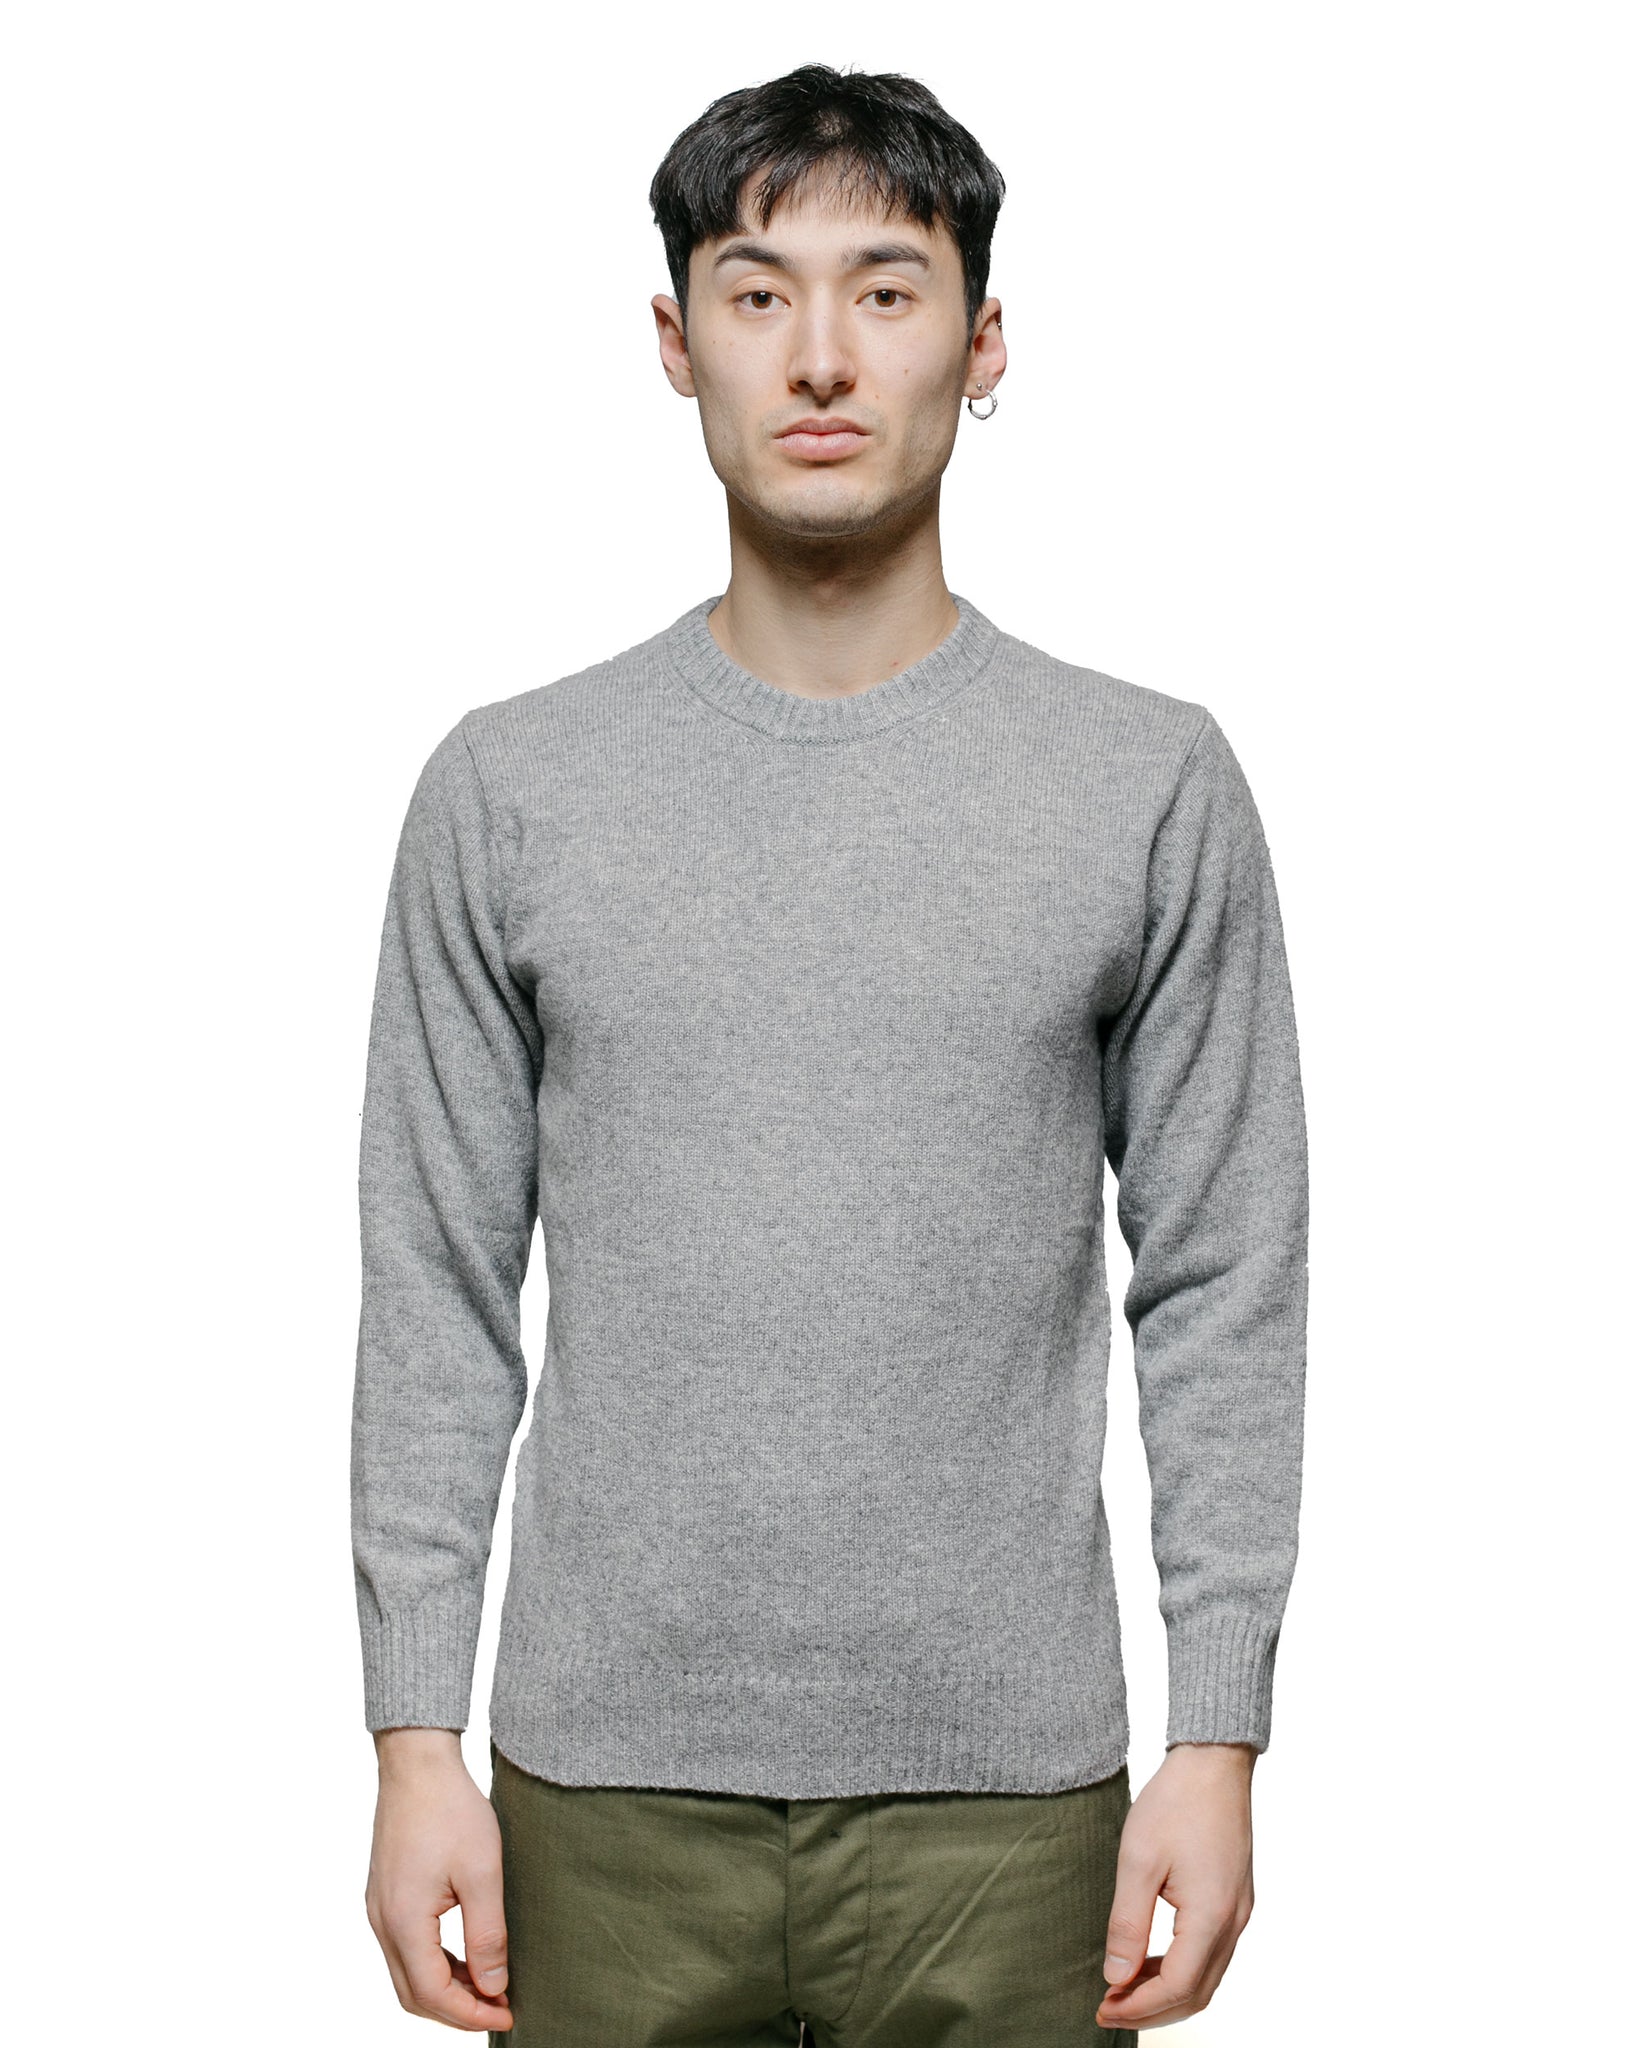 The Real McCoy's MC21114 Wool Crewneck Sweater Grey model front